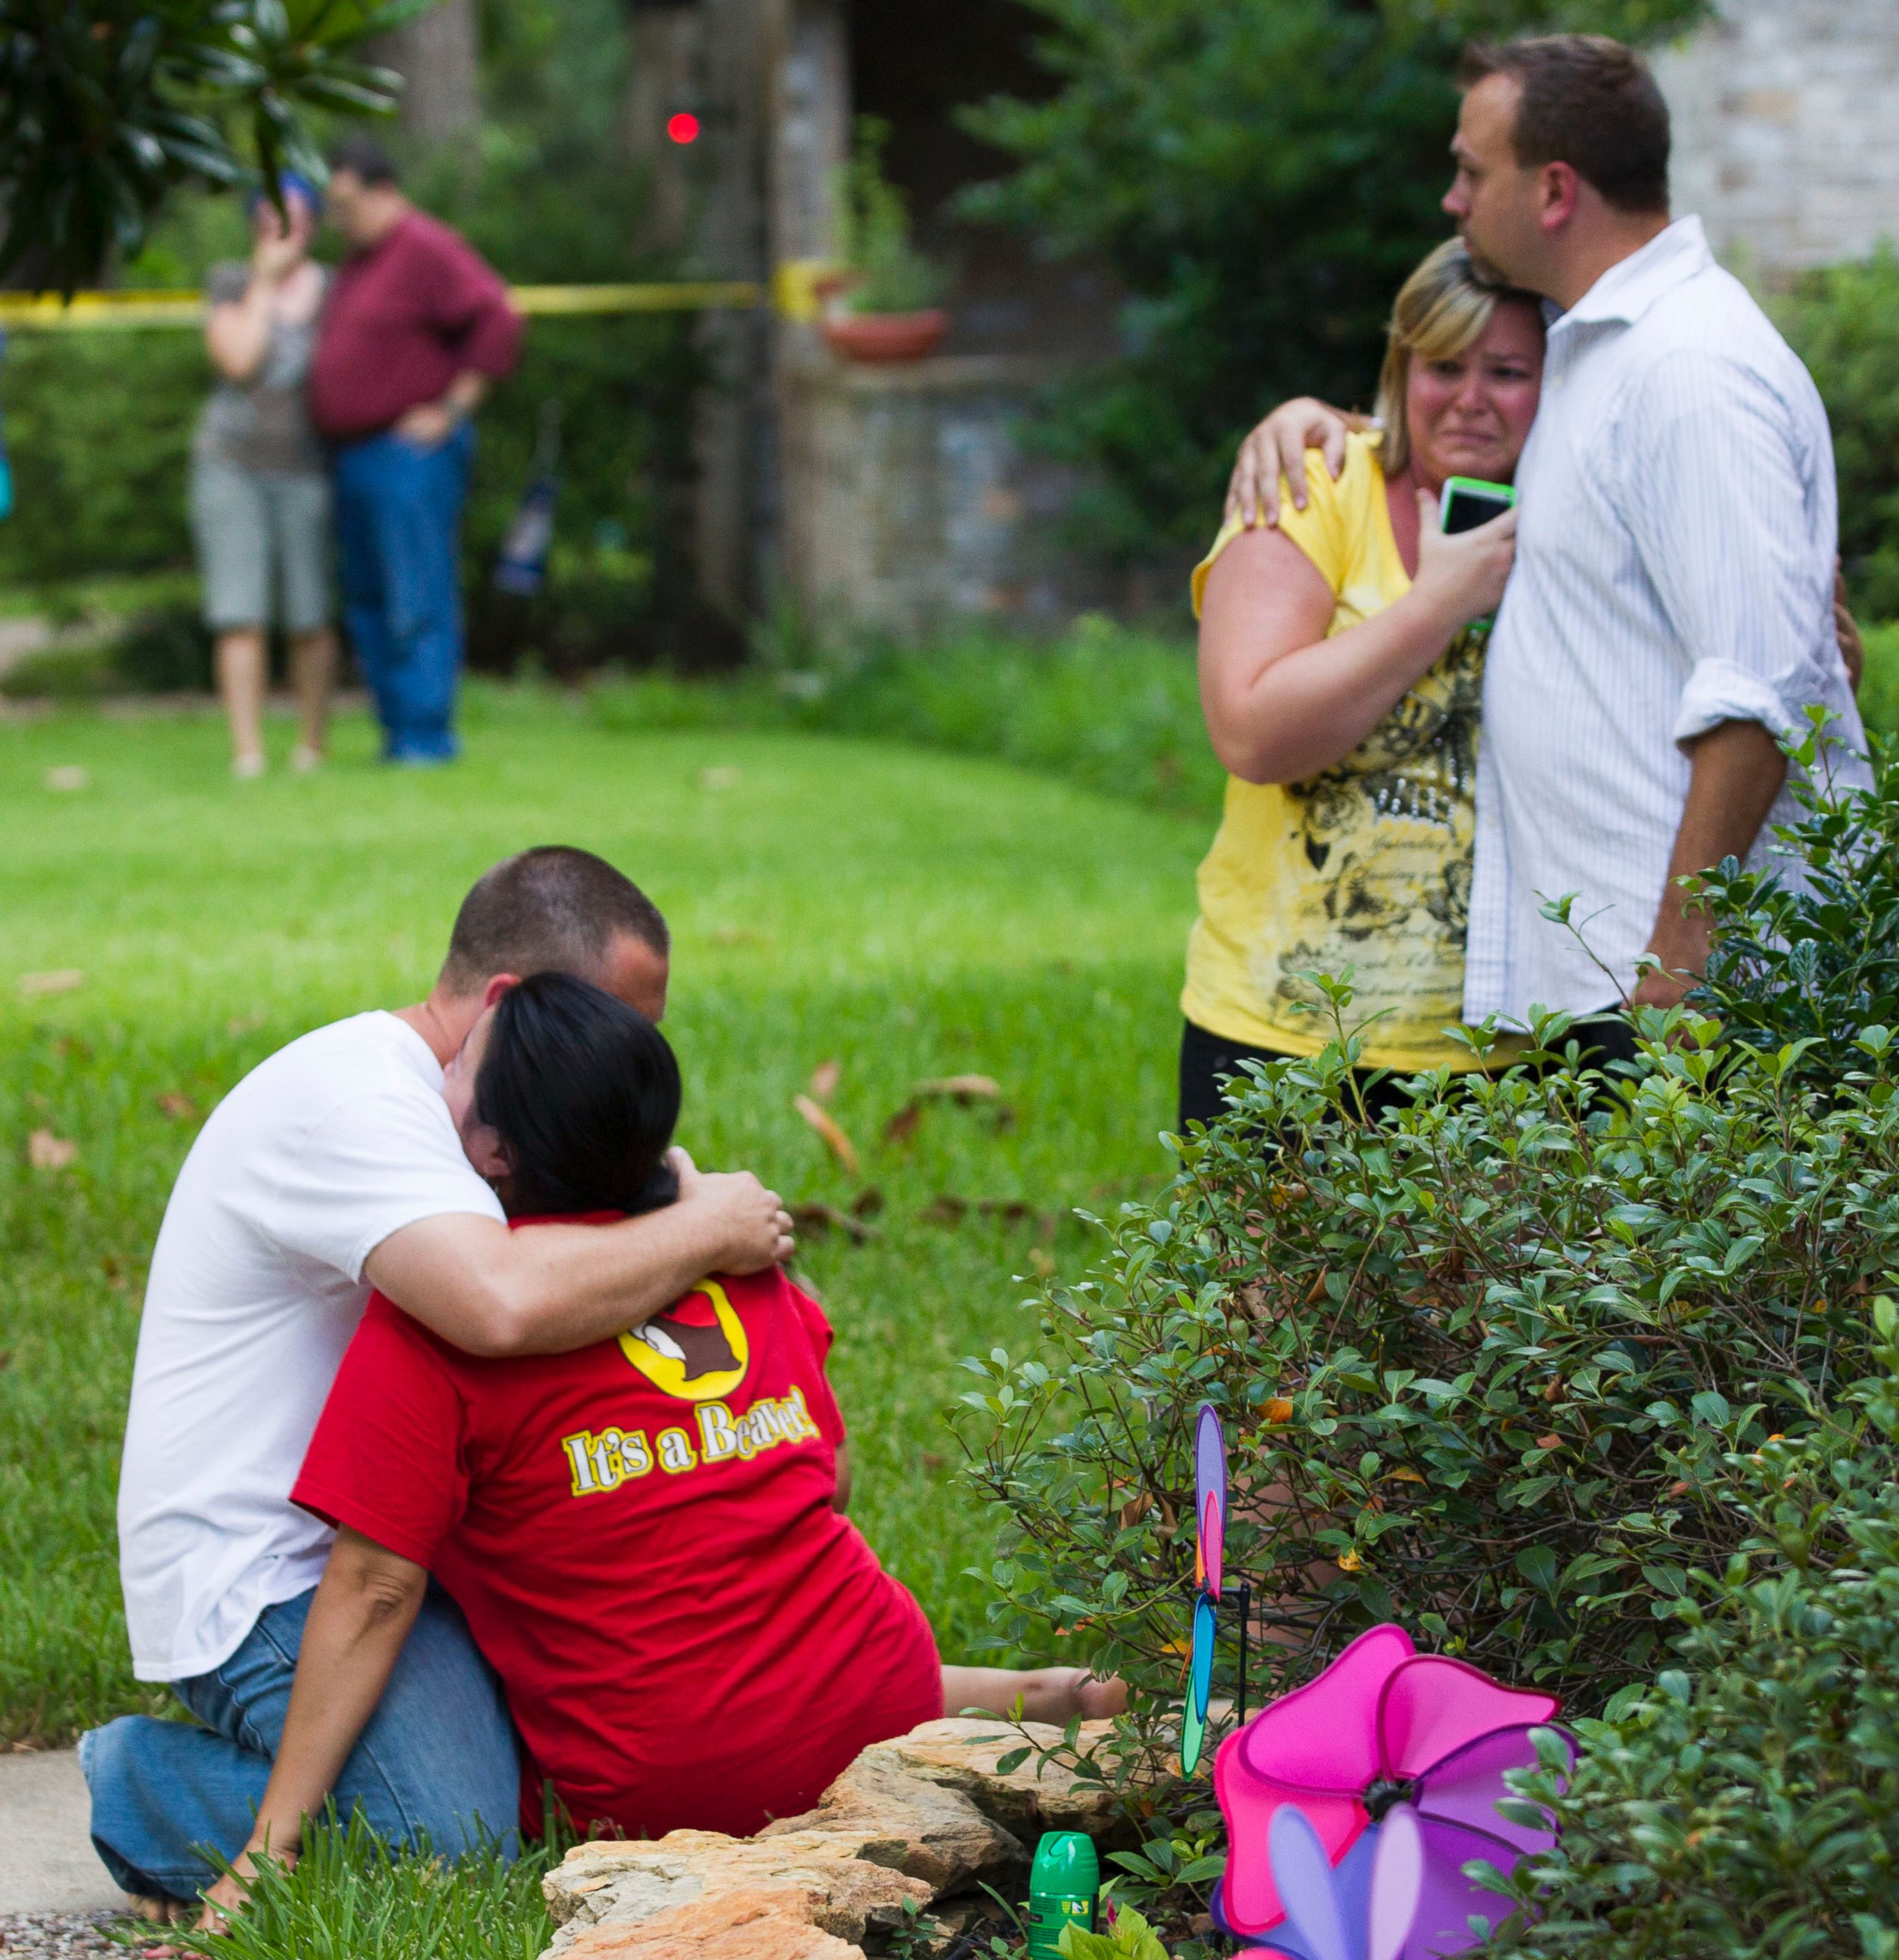 PHOTO: Neighbors embrace each other following a shooting, July 9, 2014, in Spring, Texas.